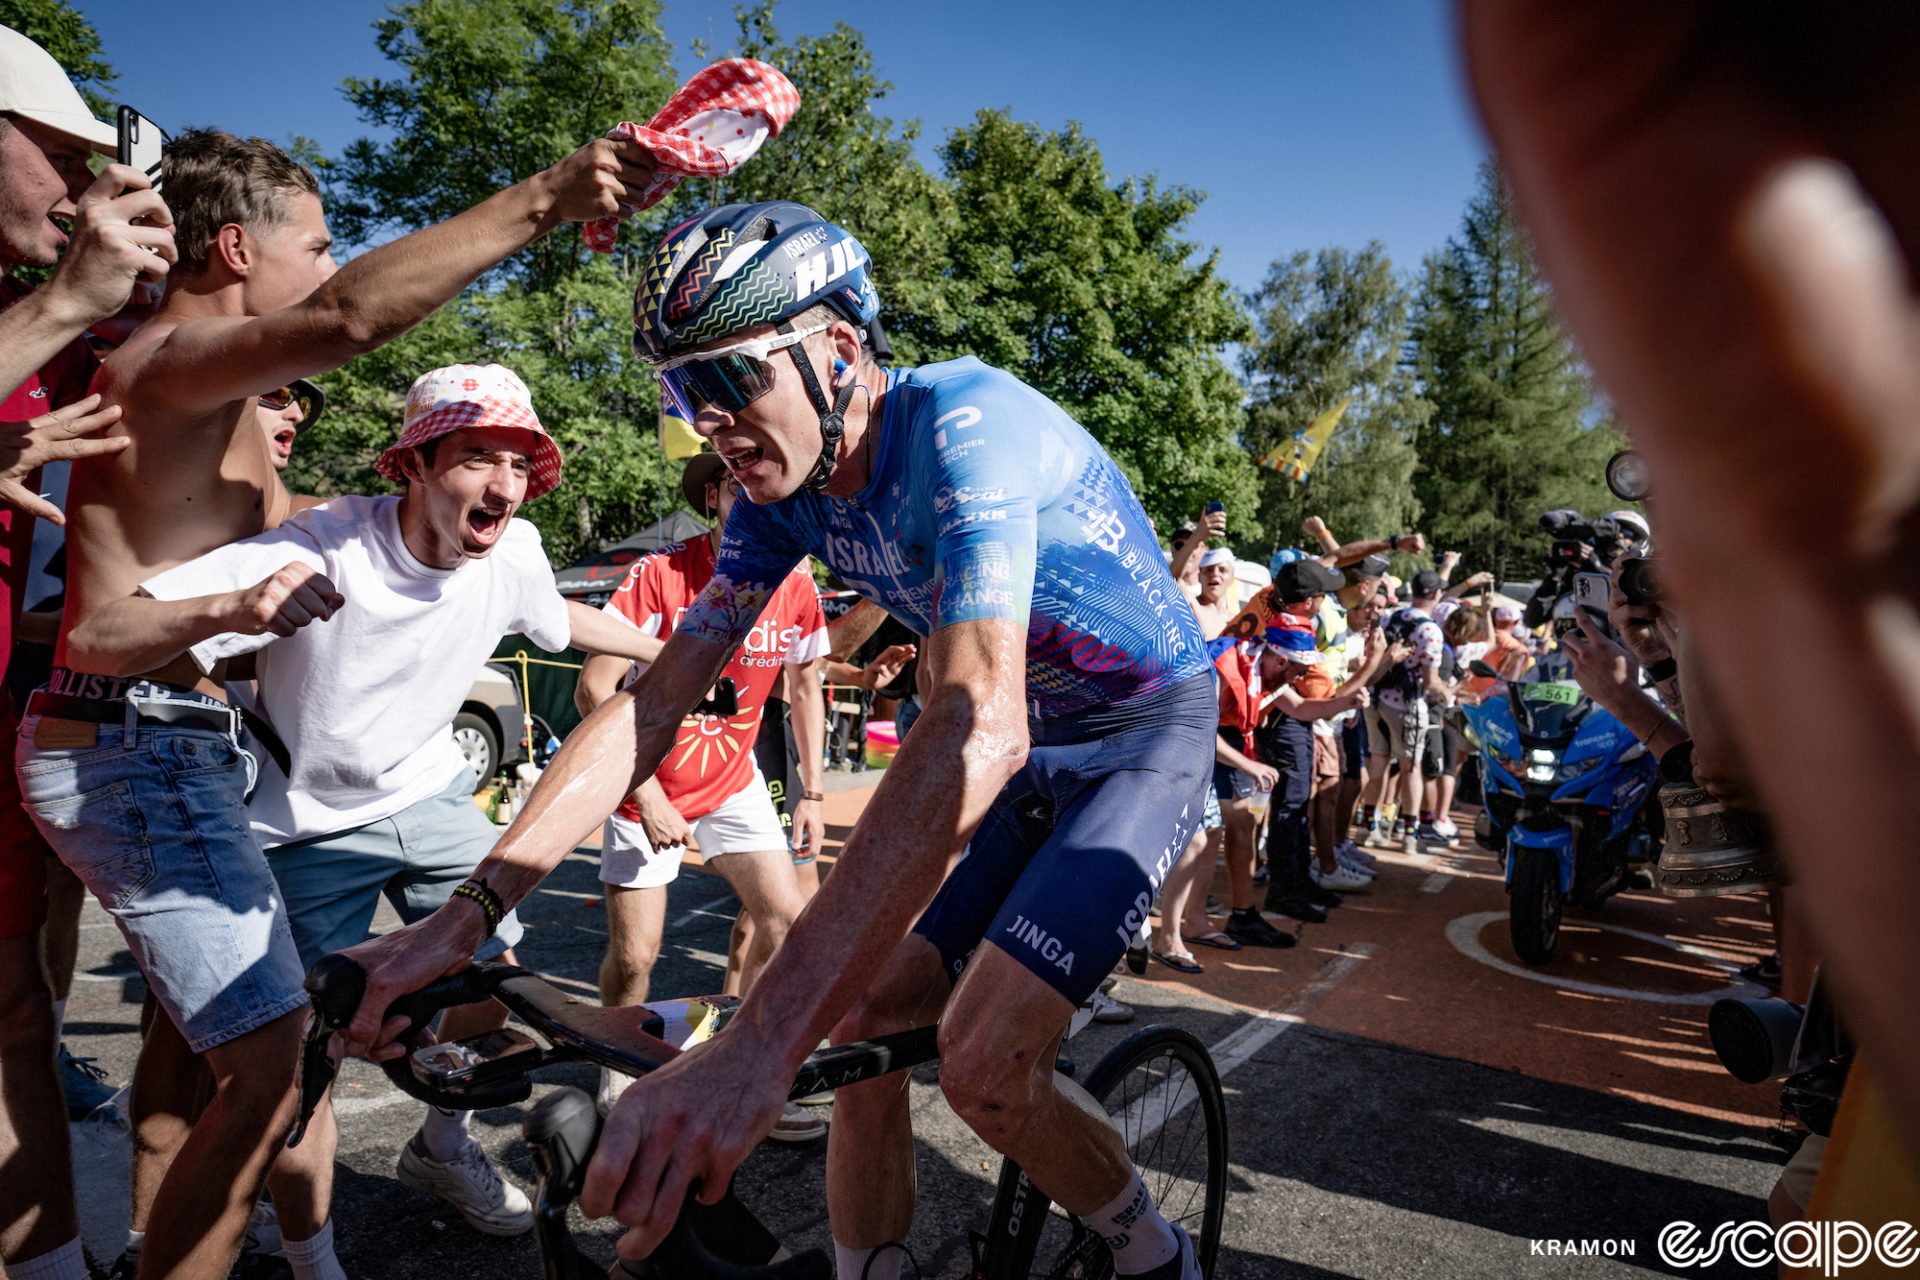 Chris Froome rides in the breakaway on Alpe d'Huez at the 2022 Tour de France, tailed by a motorbike and surrounded by hordes of cheering fans.